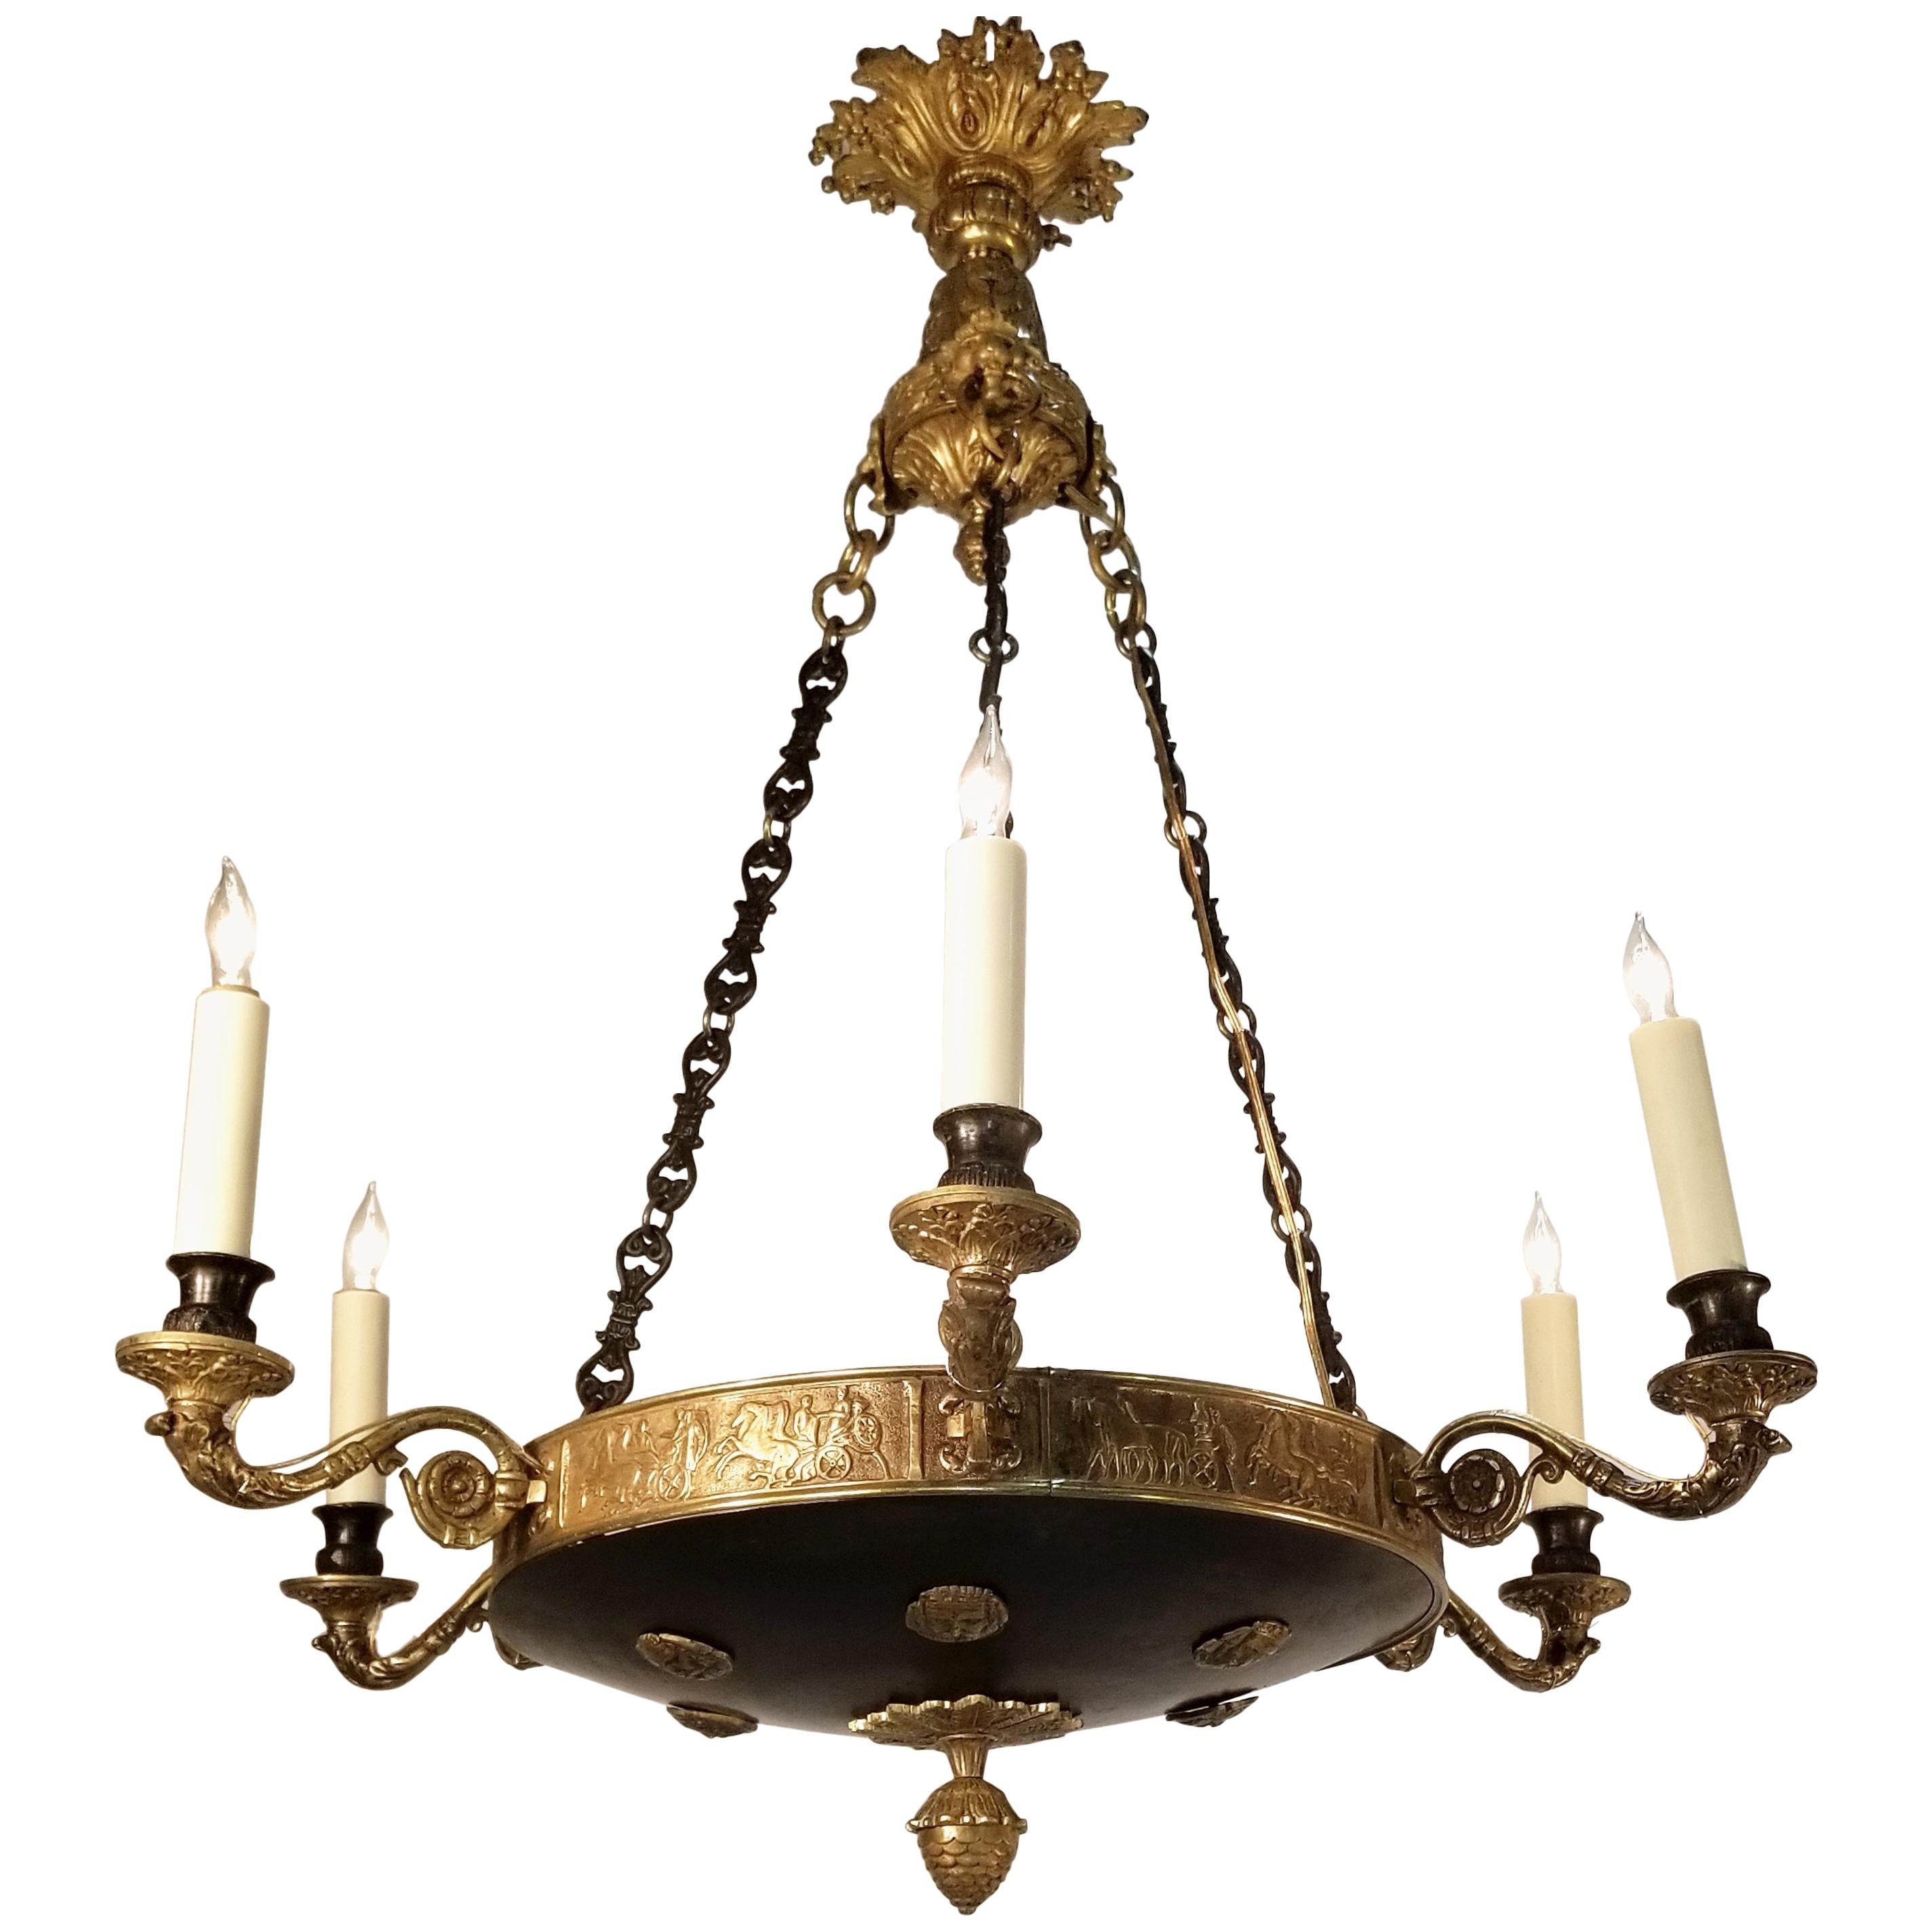 19th Century English Regency Brass and Patinated Brass Chandelier